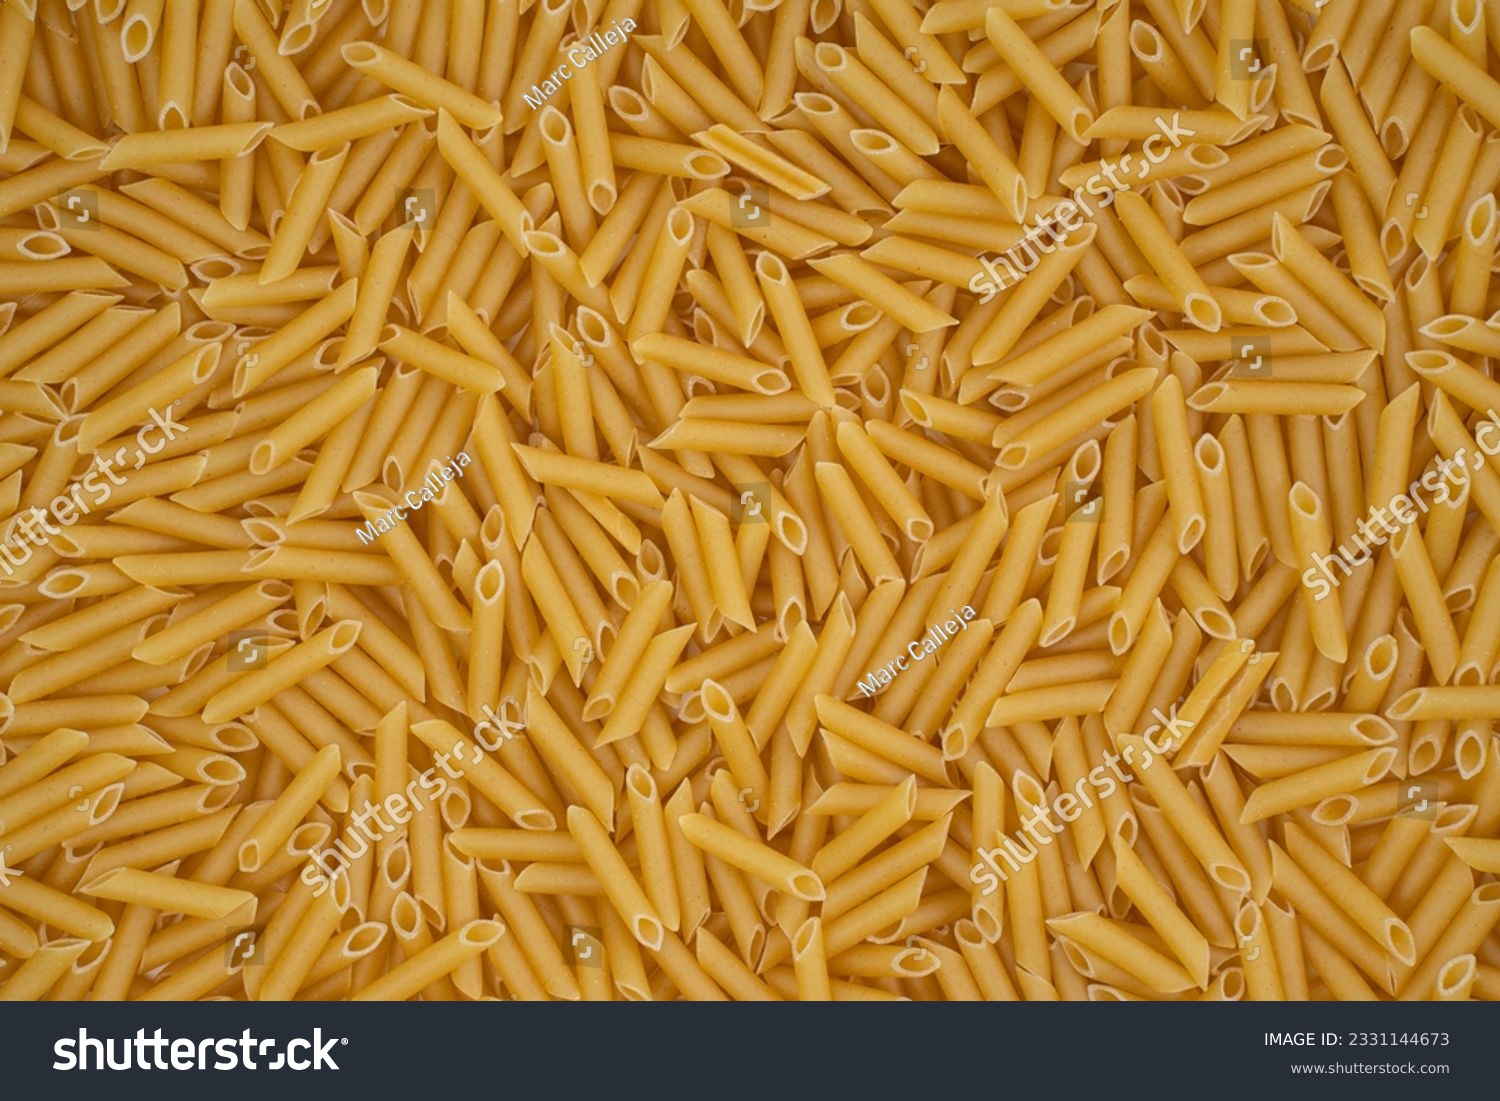 Top view Background image with dry macaroni noodles #2331144673